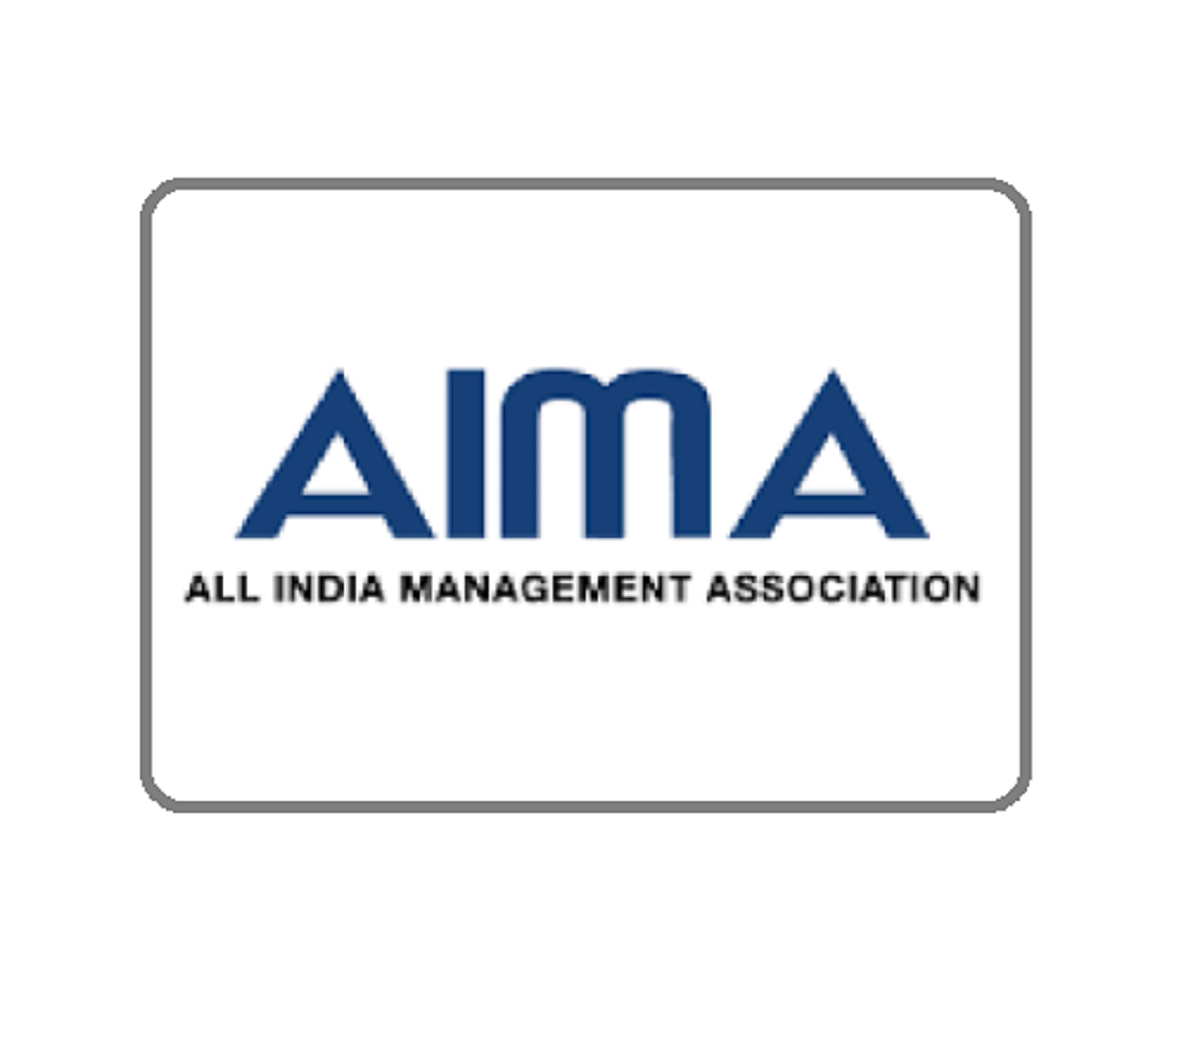 AIMA MAT CBT 2020 Admit Card Released, Download Now